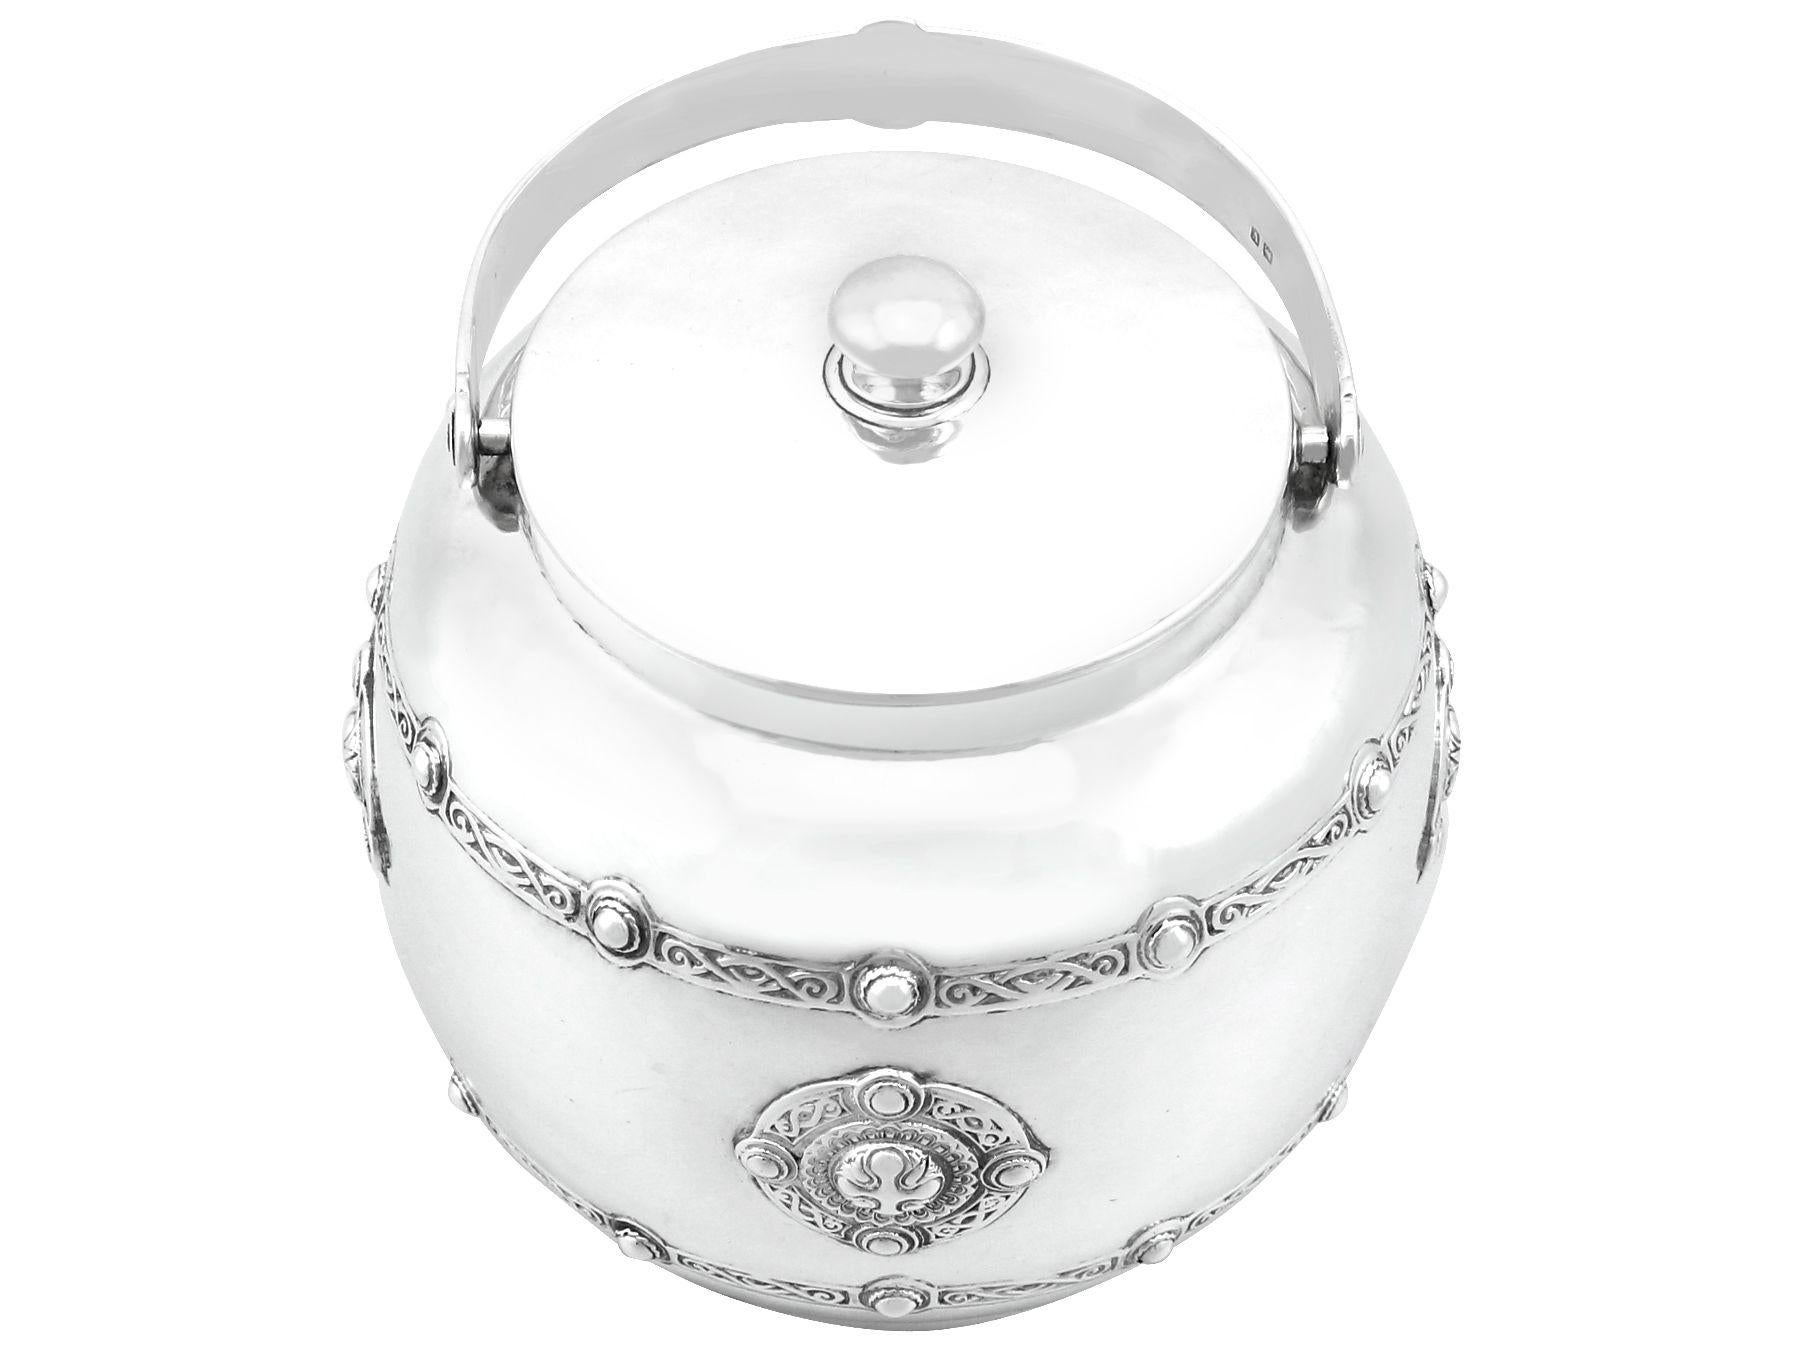 An exceptional, fine and impressive antique George V sterling silver Arts and Crafts style biscuit barrel made by Liberty & Co Ltd; an addition to the ornamental silverware collection

This exceptional, fine and impressive antique George V